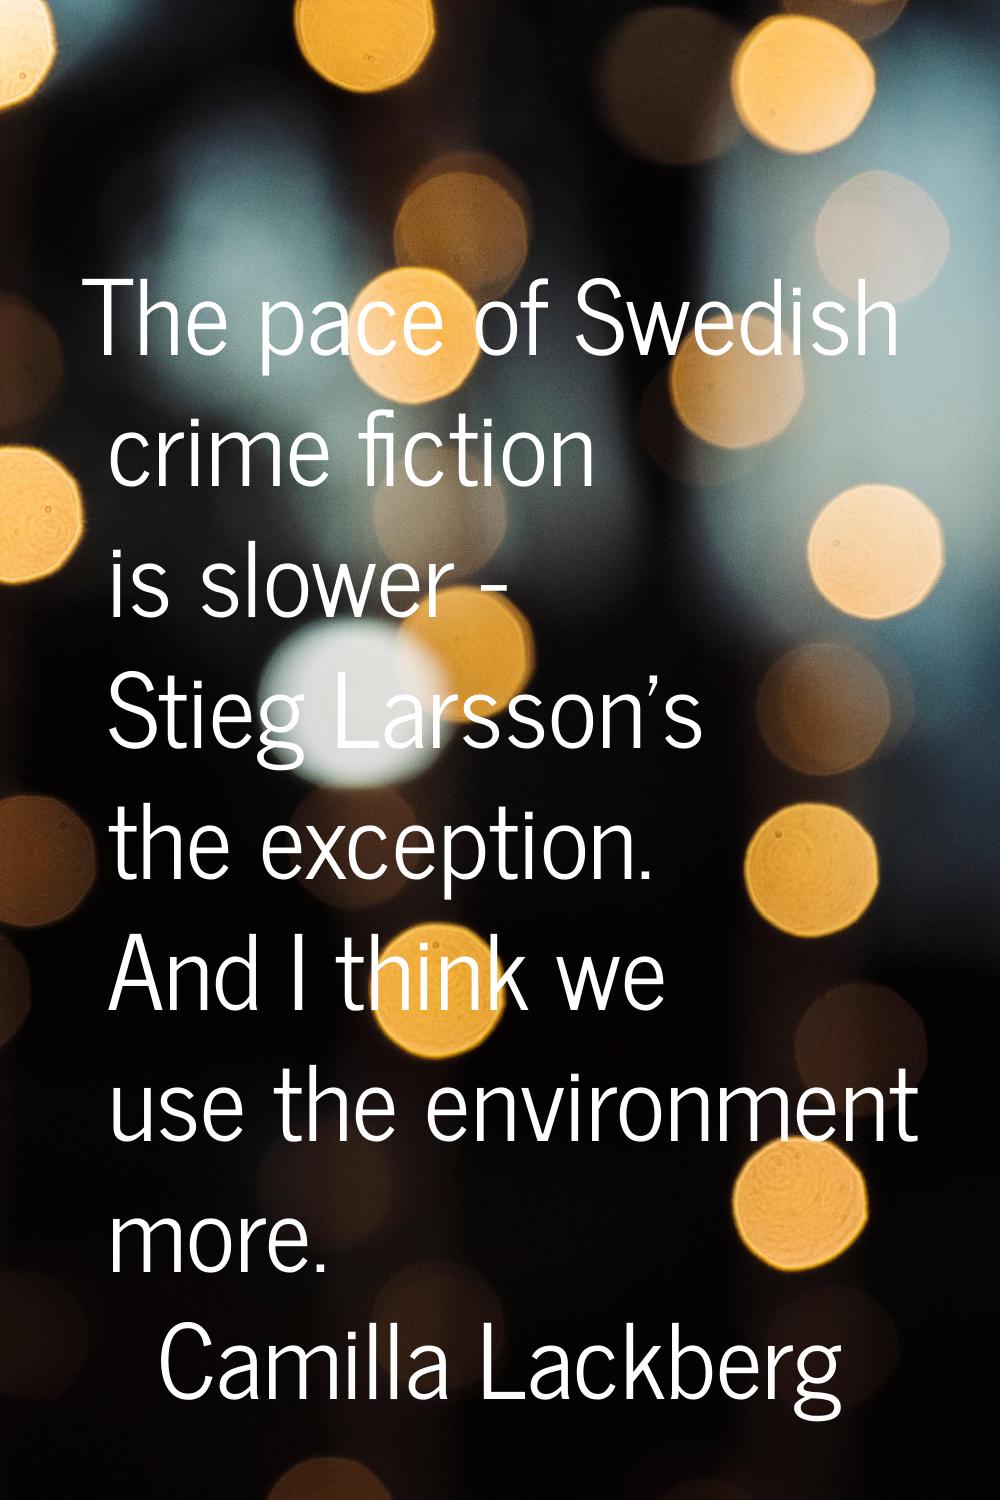 The pace of Swedish crime fiction is slower - Stieg Larsson's the exception. And I think we use the